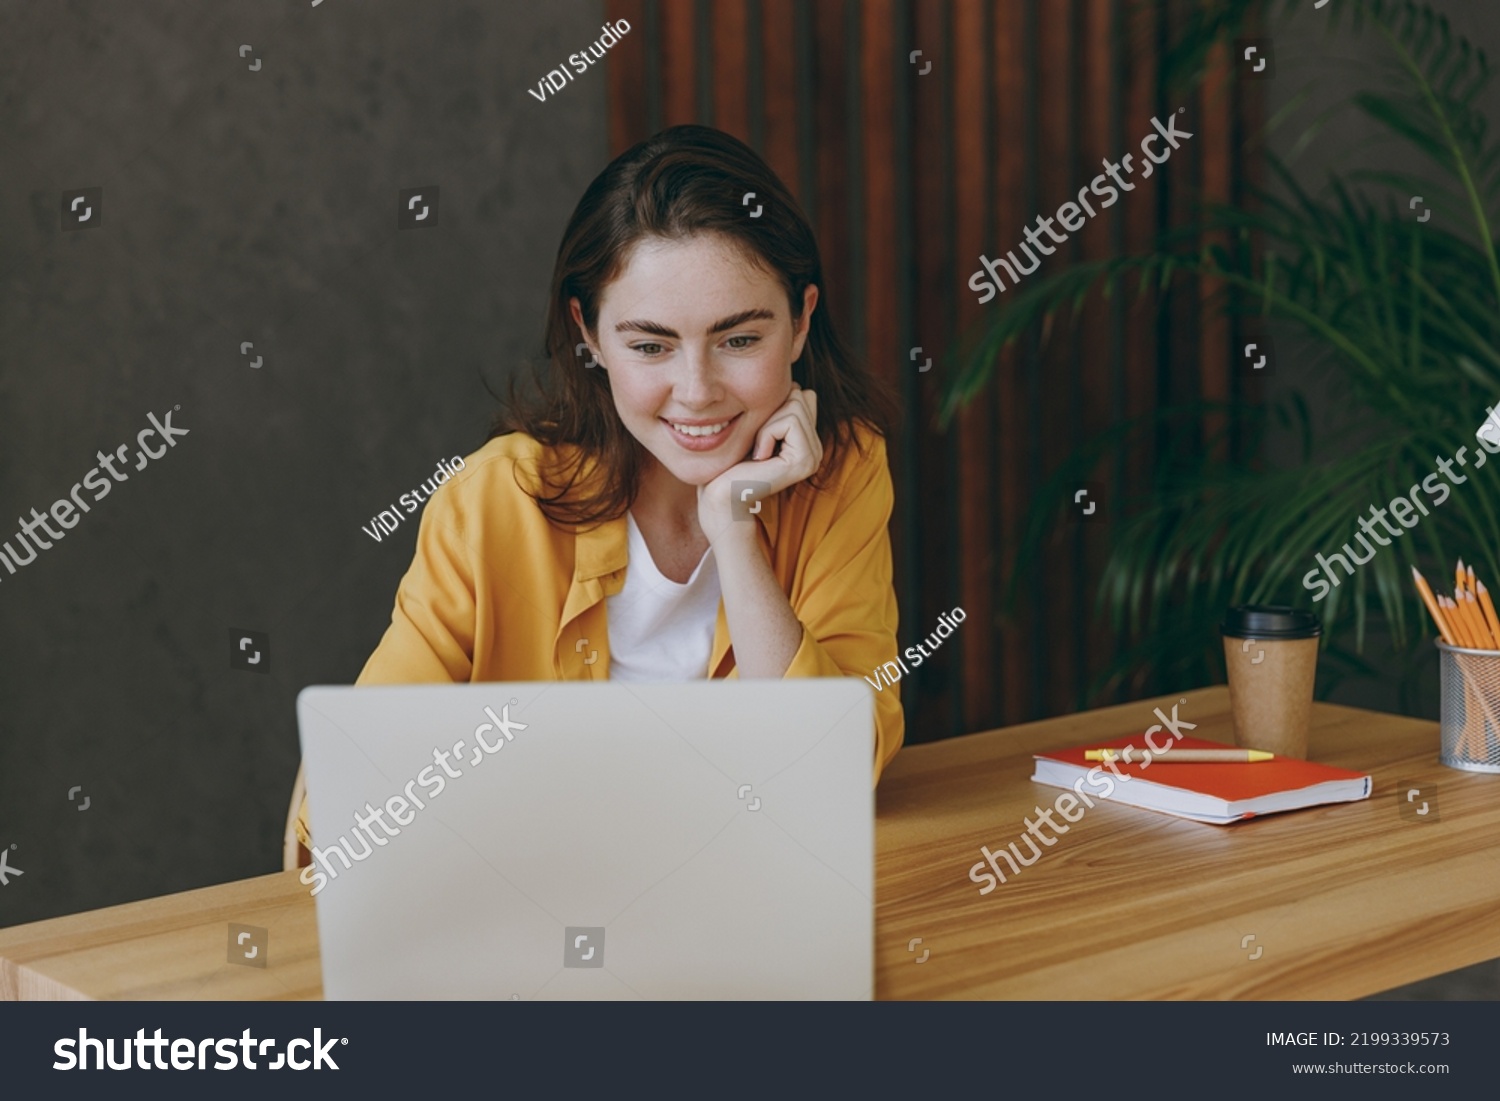 Young satisfied fun happy successful employee business woman 20s she wearing casual yellow shirt hold use laptop pc computer sit work at wooden office desk with pc laptop. Achievement career concept #2199339573